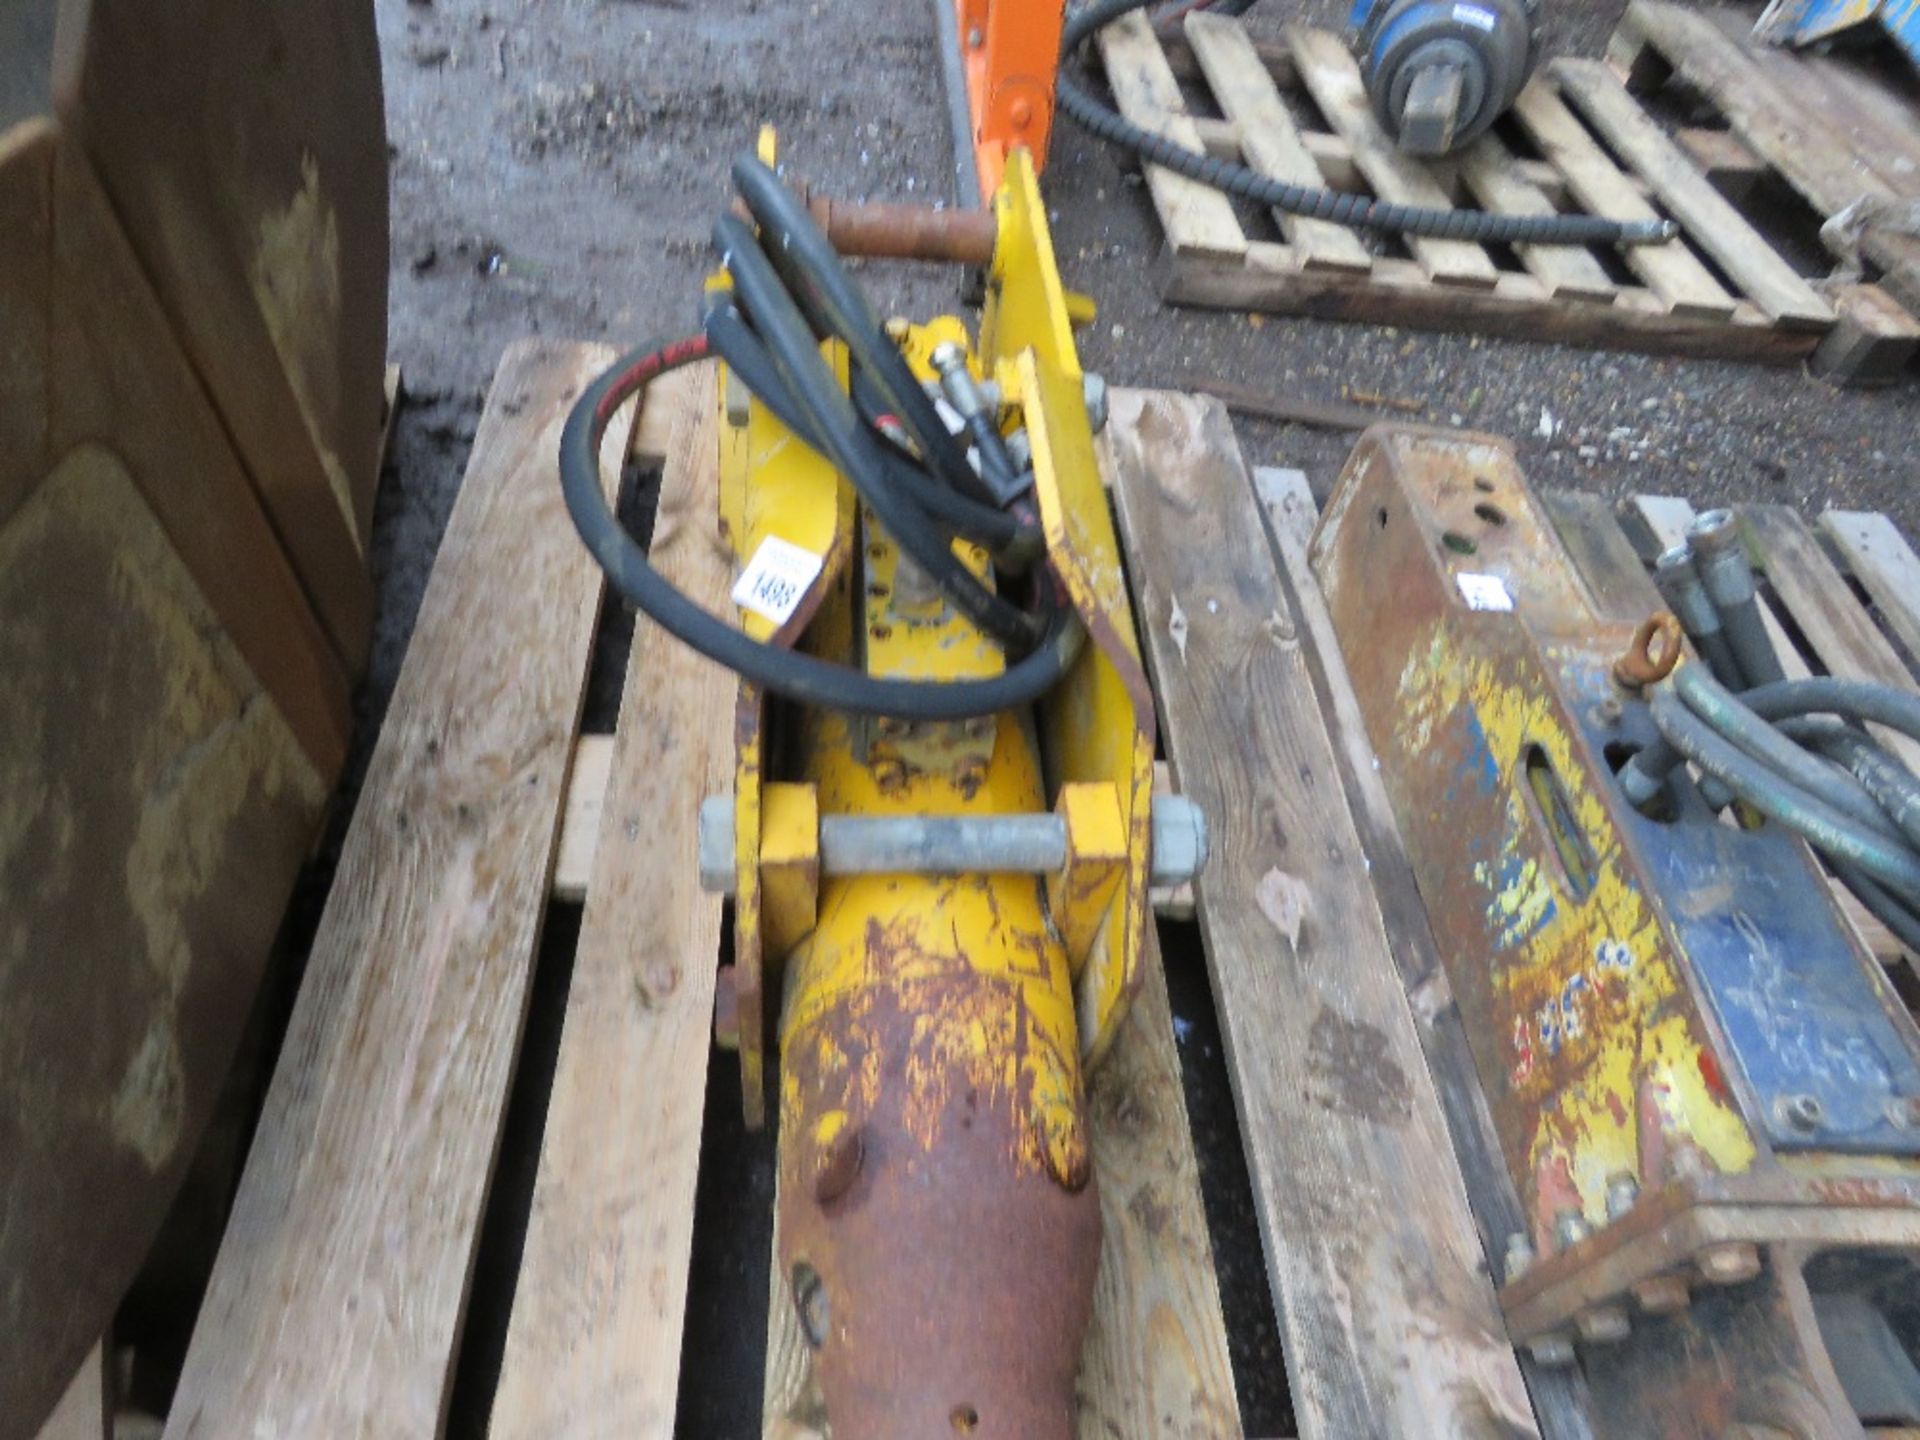 ARROWHEAD CONTRACTOR 4T EXCAVATOR MOUNTED BREAKER ON 45MM PINS. HAS DONE VERY LITTLE WORK, BELIEVED - Image 3 of 5